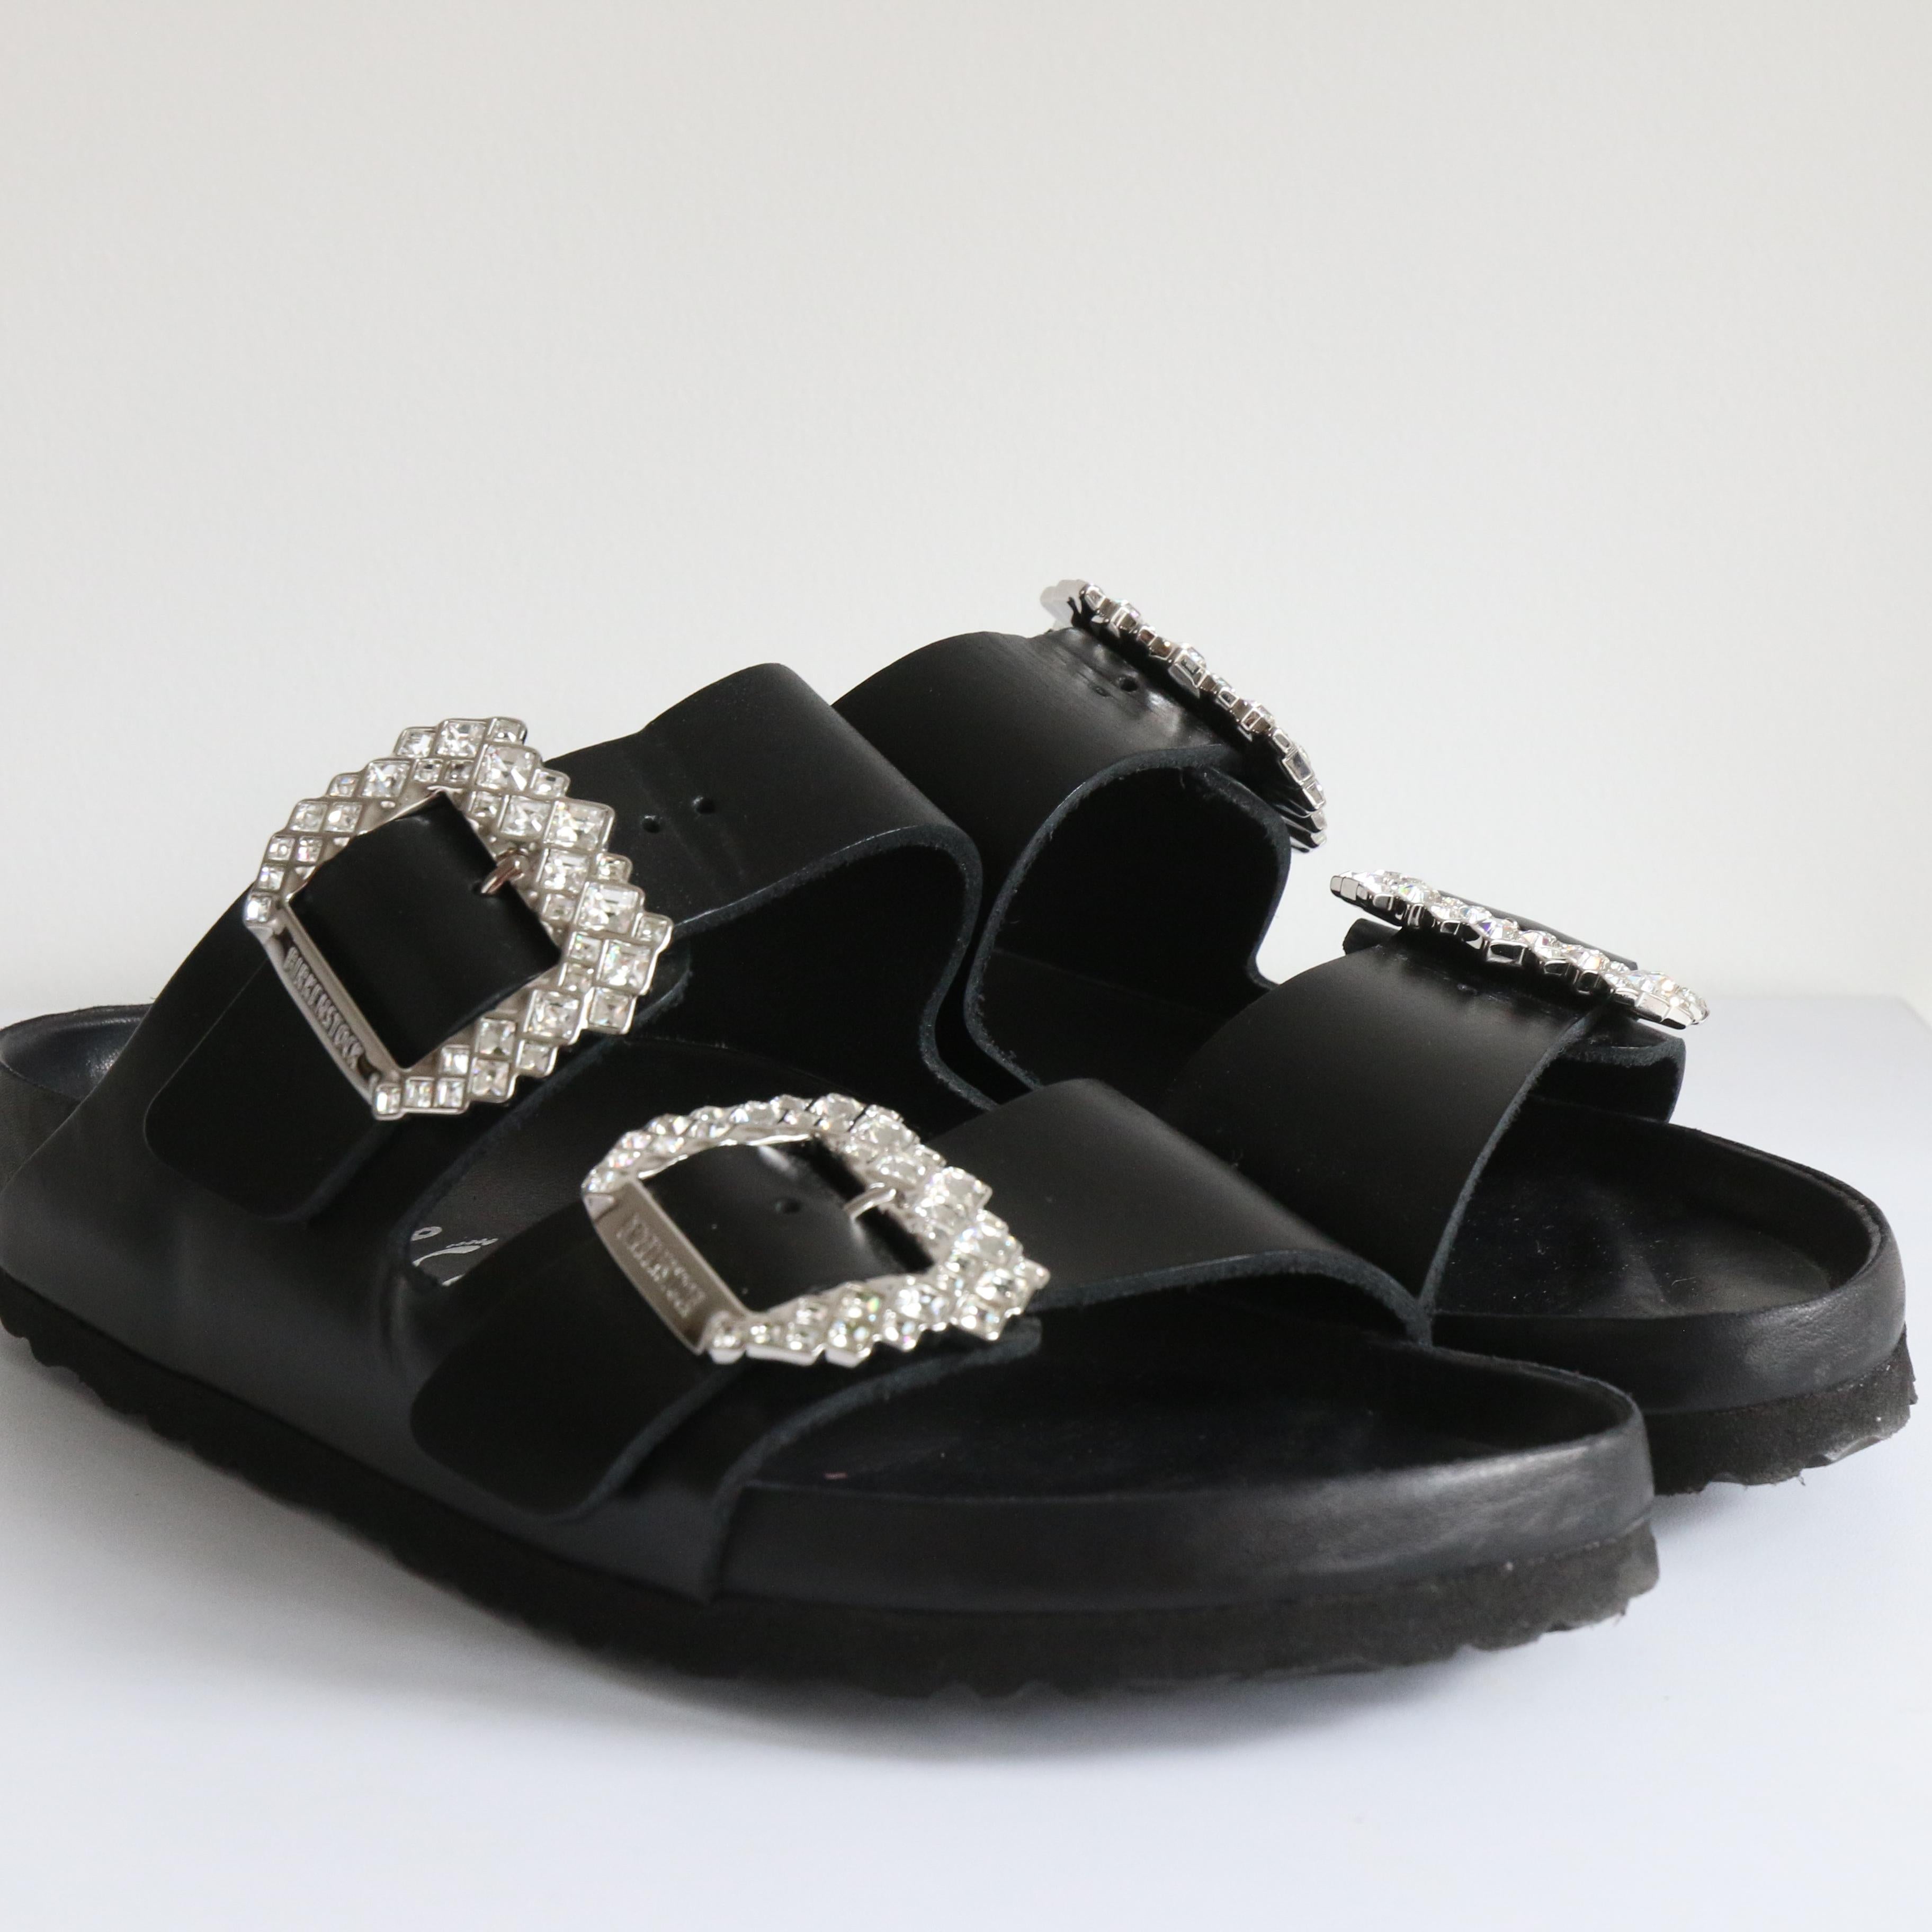 This sparkling pair of Birkenstock sandals from the highly sought after and now sold out 2022 capsule collection with Manolo Blahnik are the perfect summer shoe. 

In soft black leather with an an open toe, and statement double buckle design, with